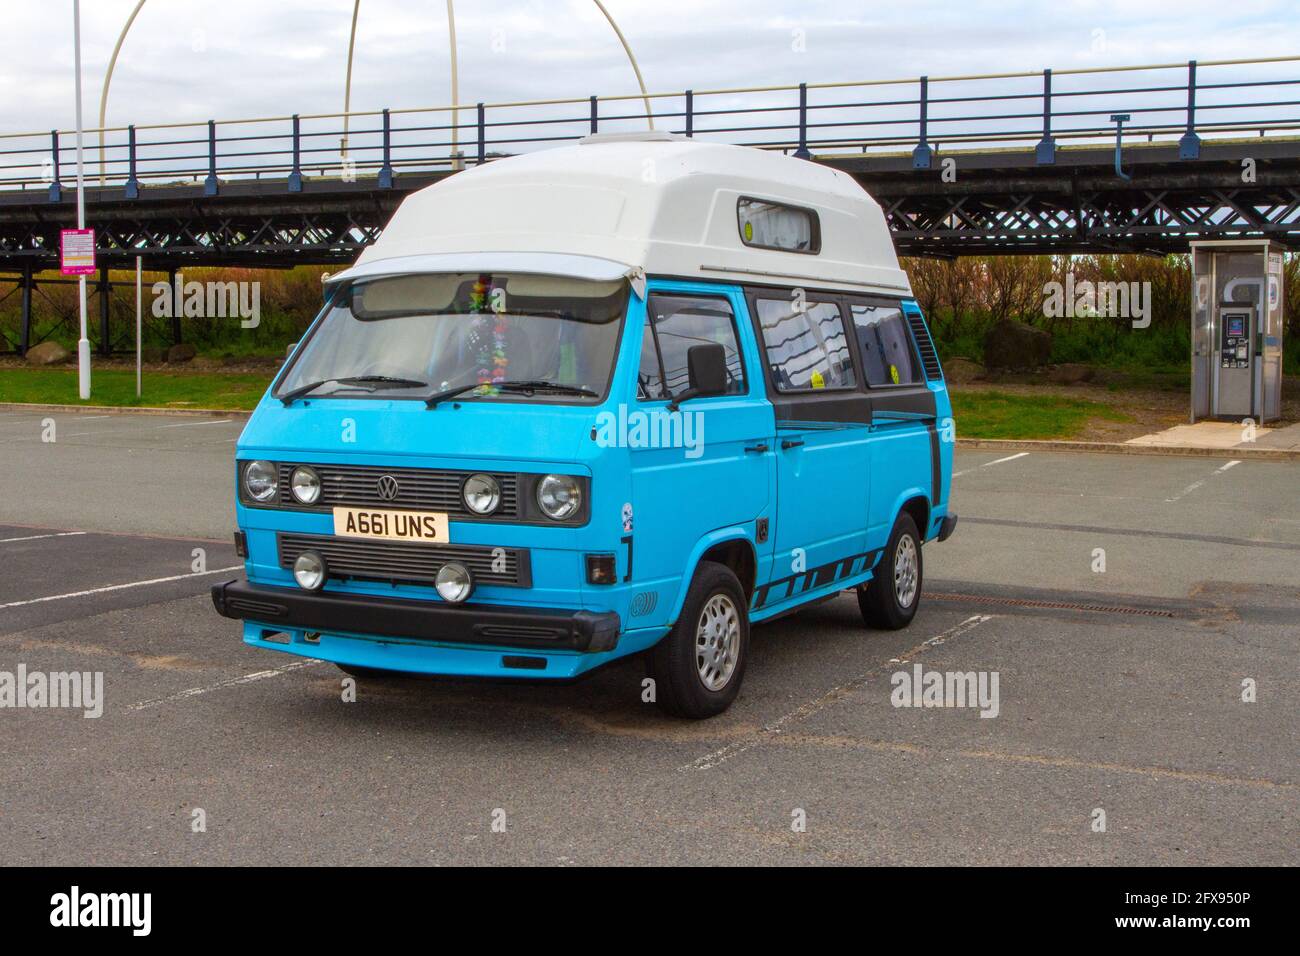 1984 80s blue white VW Volkswagen 1600cc : Caravans and Motorhomes, campervans on Britain's roads, RV leisure vehicle, family holidays, caravanette vacations, Touring caravan holiday, van conversions, Vanagon autohome, life on the road UK Stock Photo